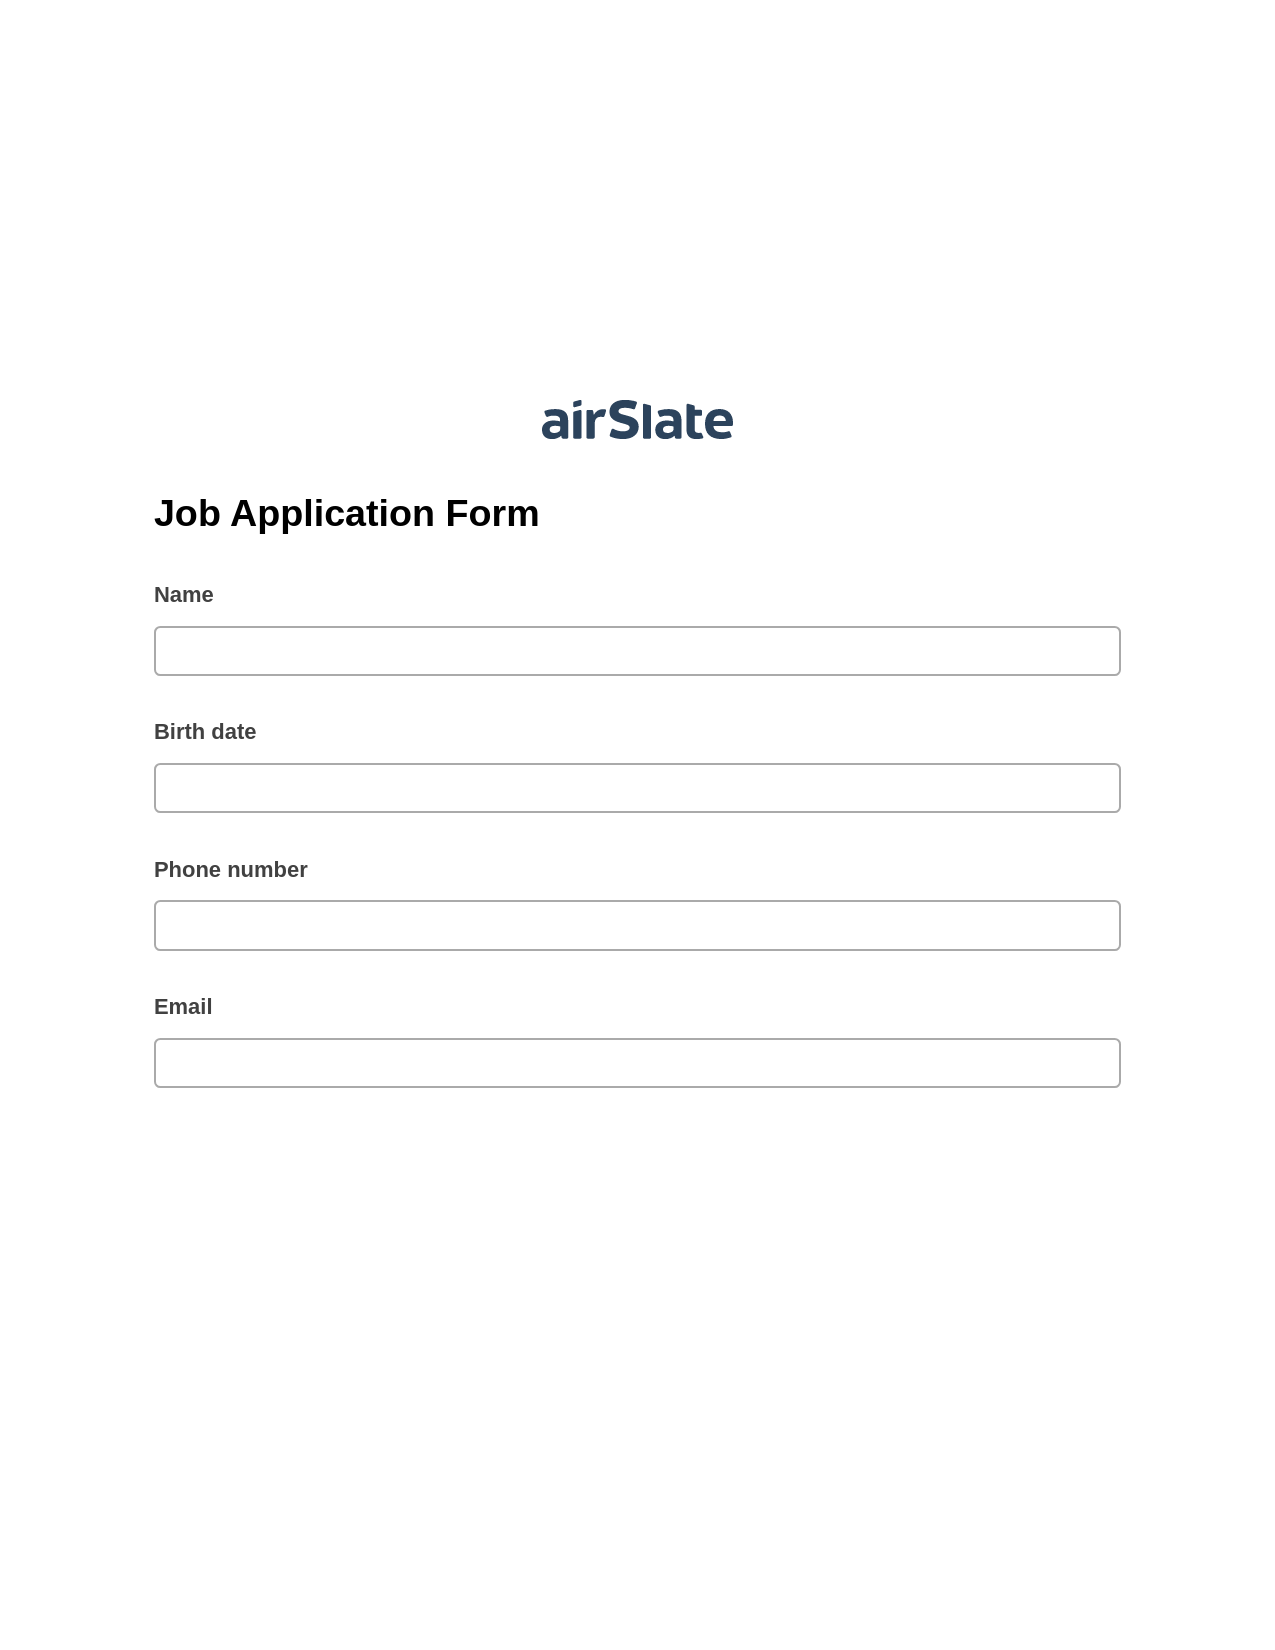 Multirole Job Application Form Pre-fill Dropdown from Airtable, Document Hide Bot, Slack Notification Postfinish Bot